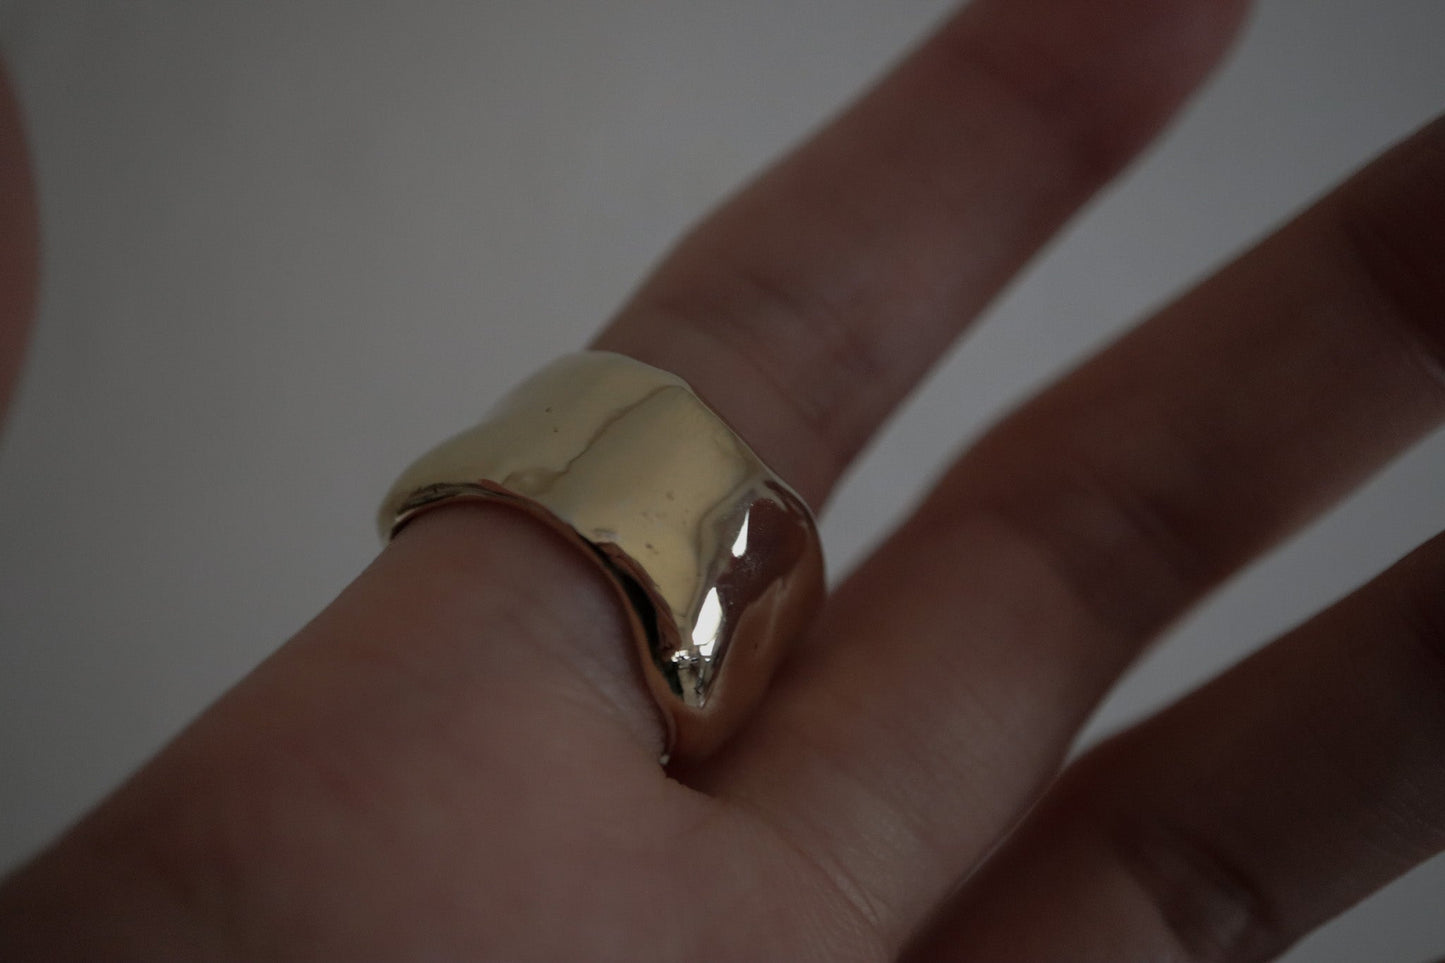 Uneven thick ring / silver / gold